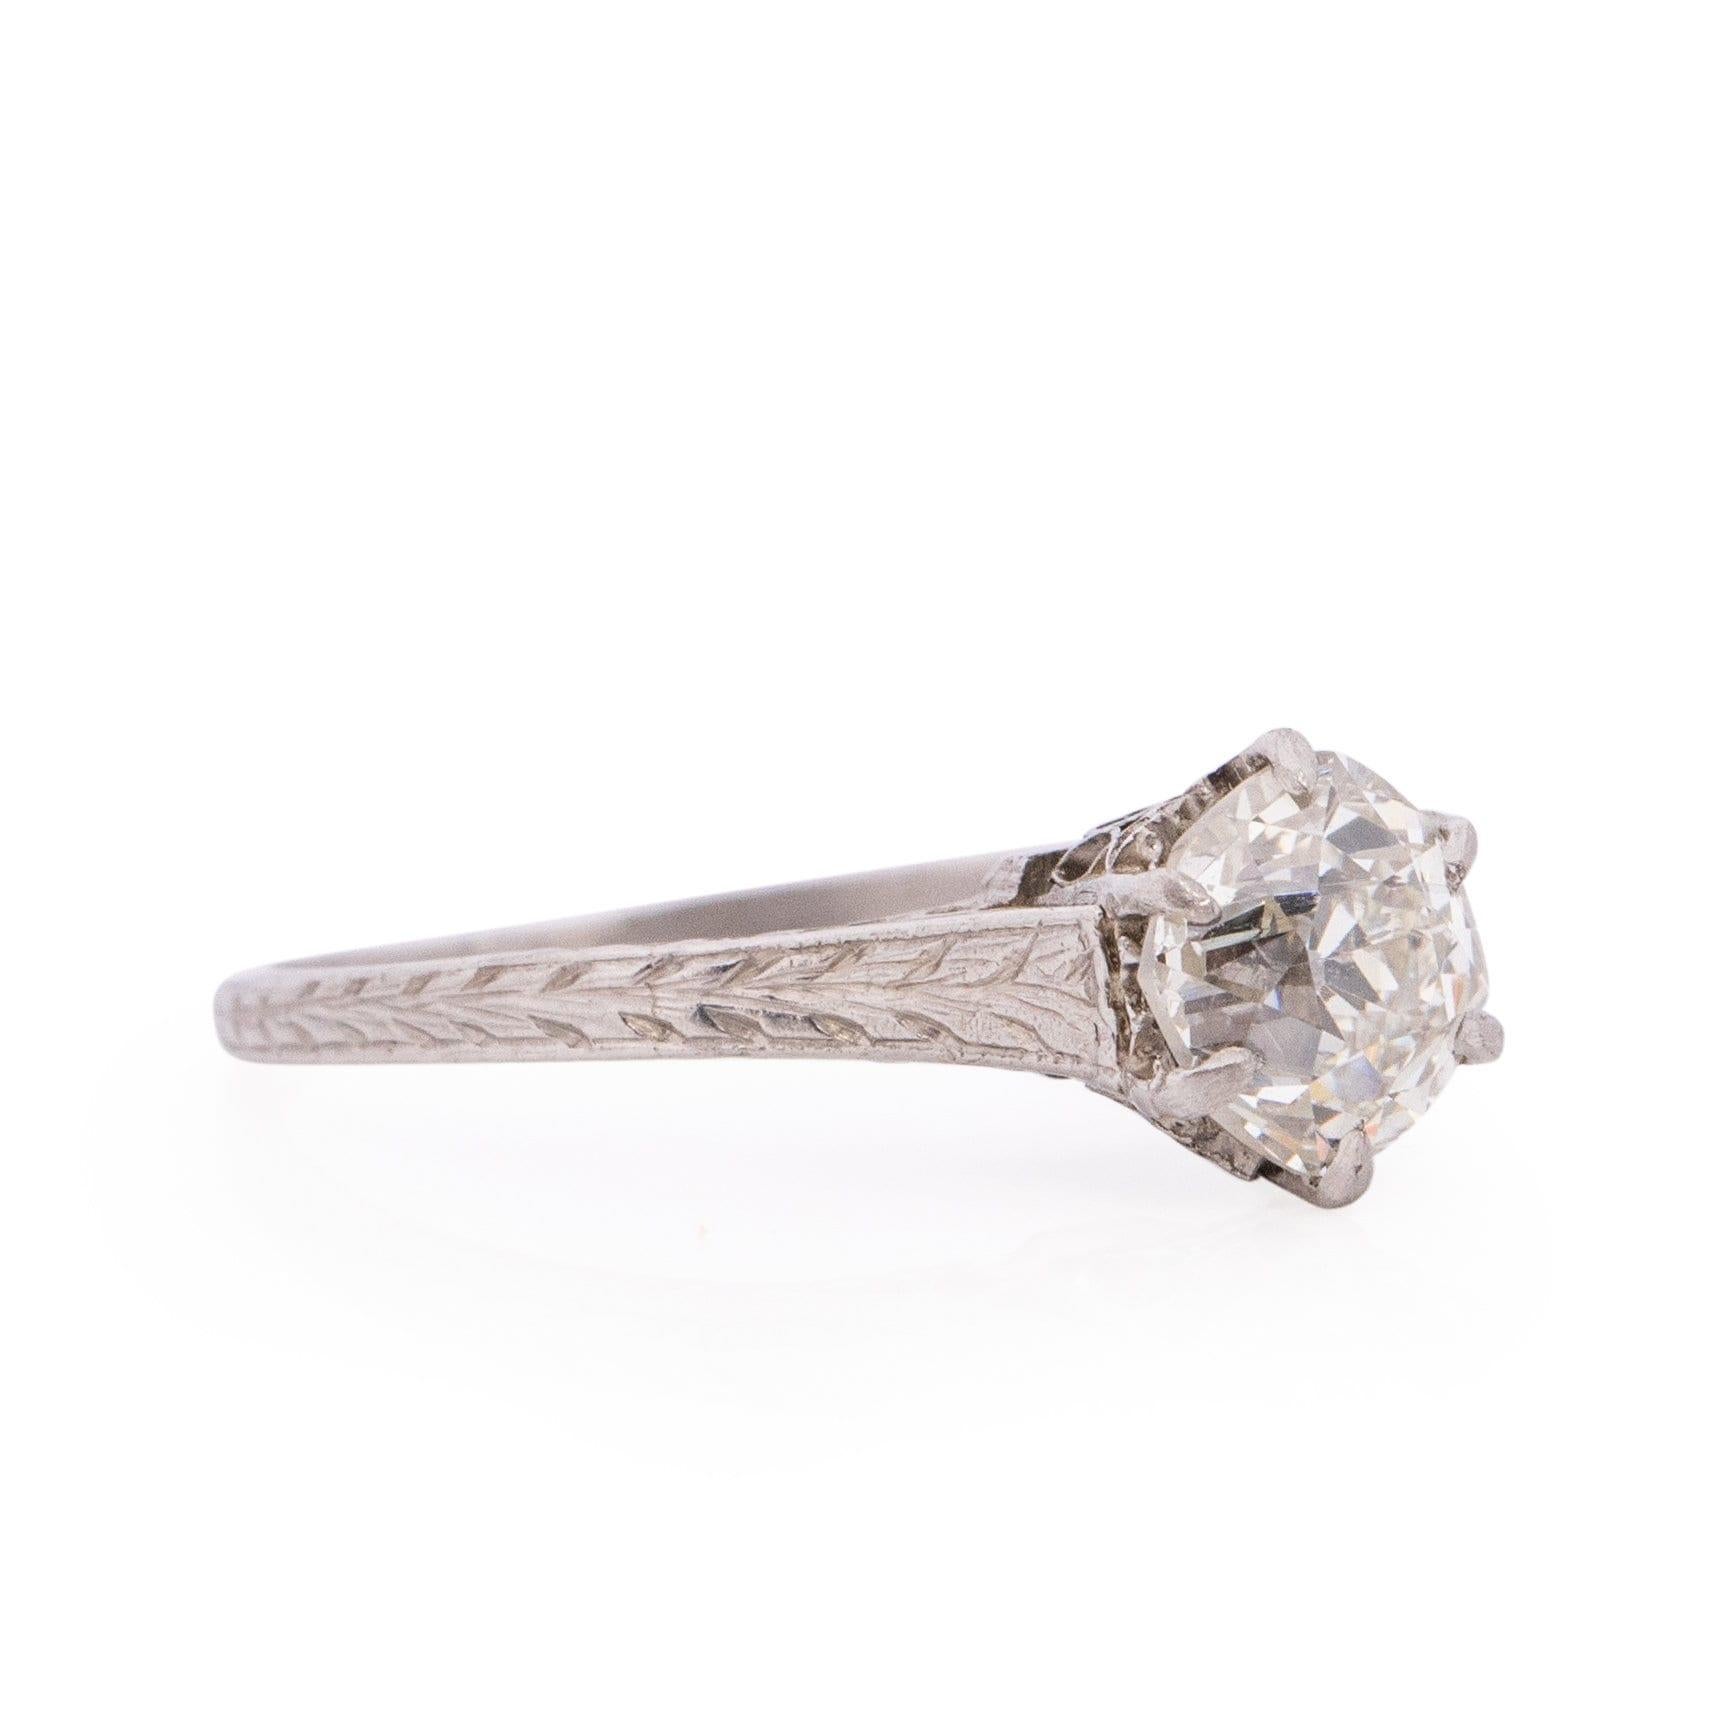 Women's Dated 1901 Edwardian Platinum 1.0CT Diamond Cathedral Shank Engagement Ring For Sale